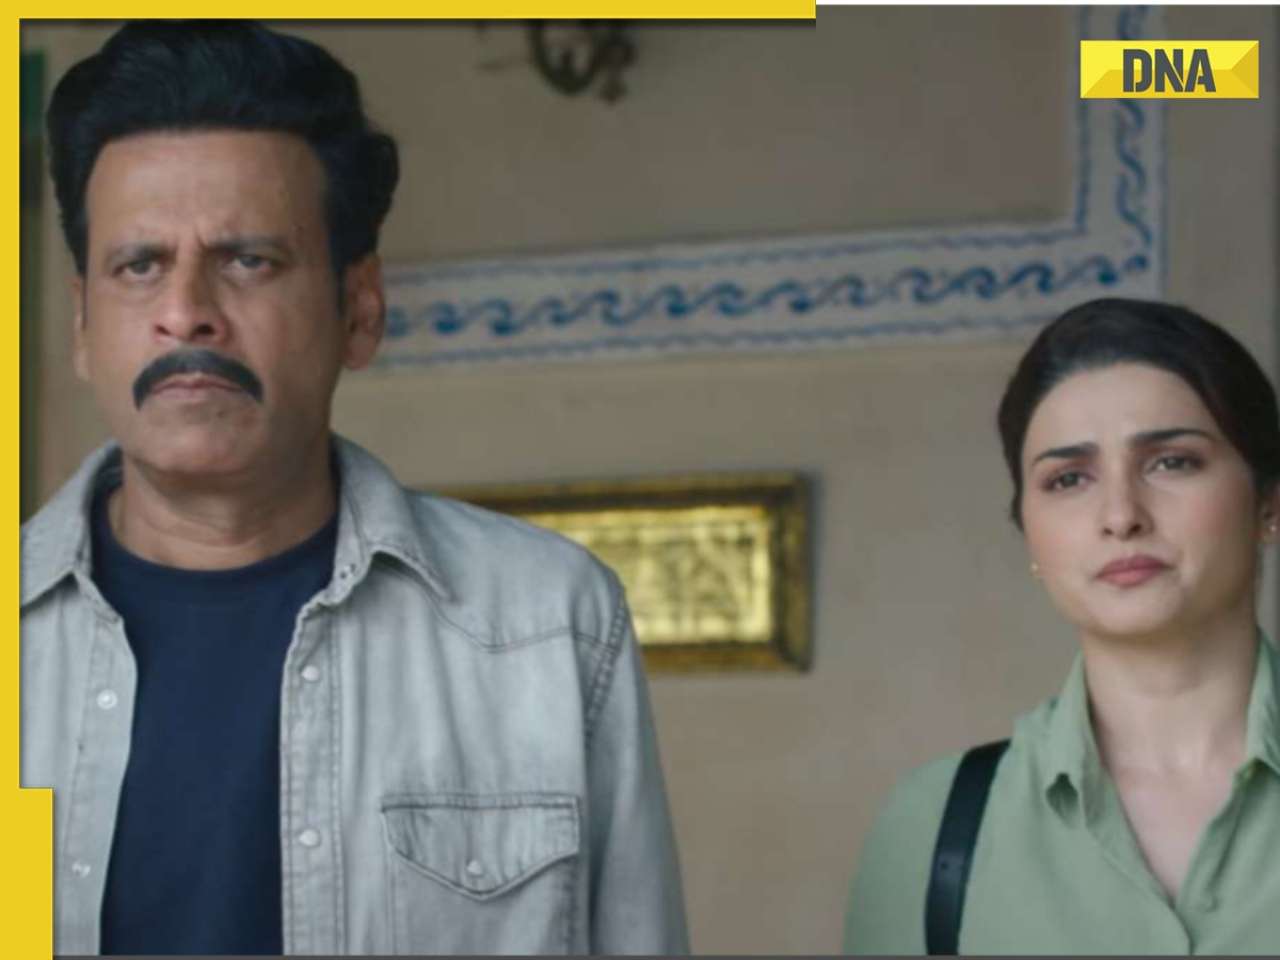 Silence 2: ACP Manoj Bajpayee, Prachi Desai race against time to solve 'twisted murder mystery' after shootout at bar